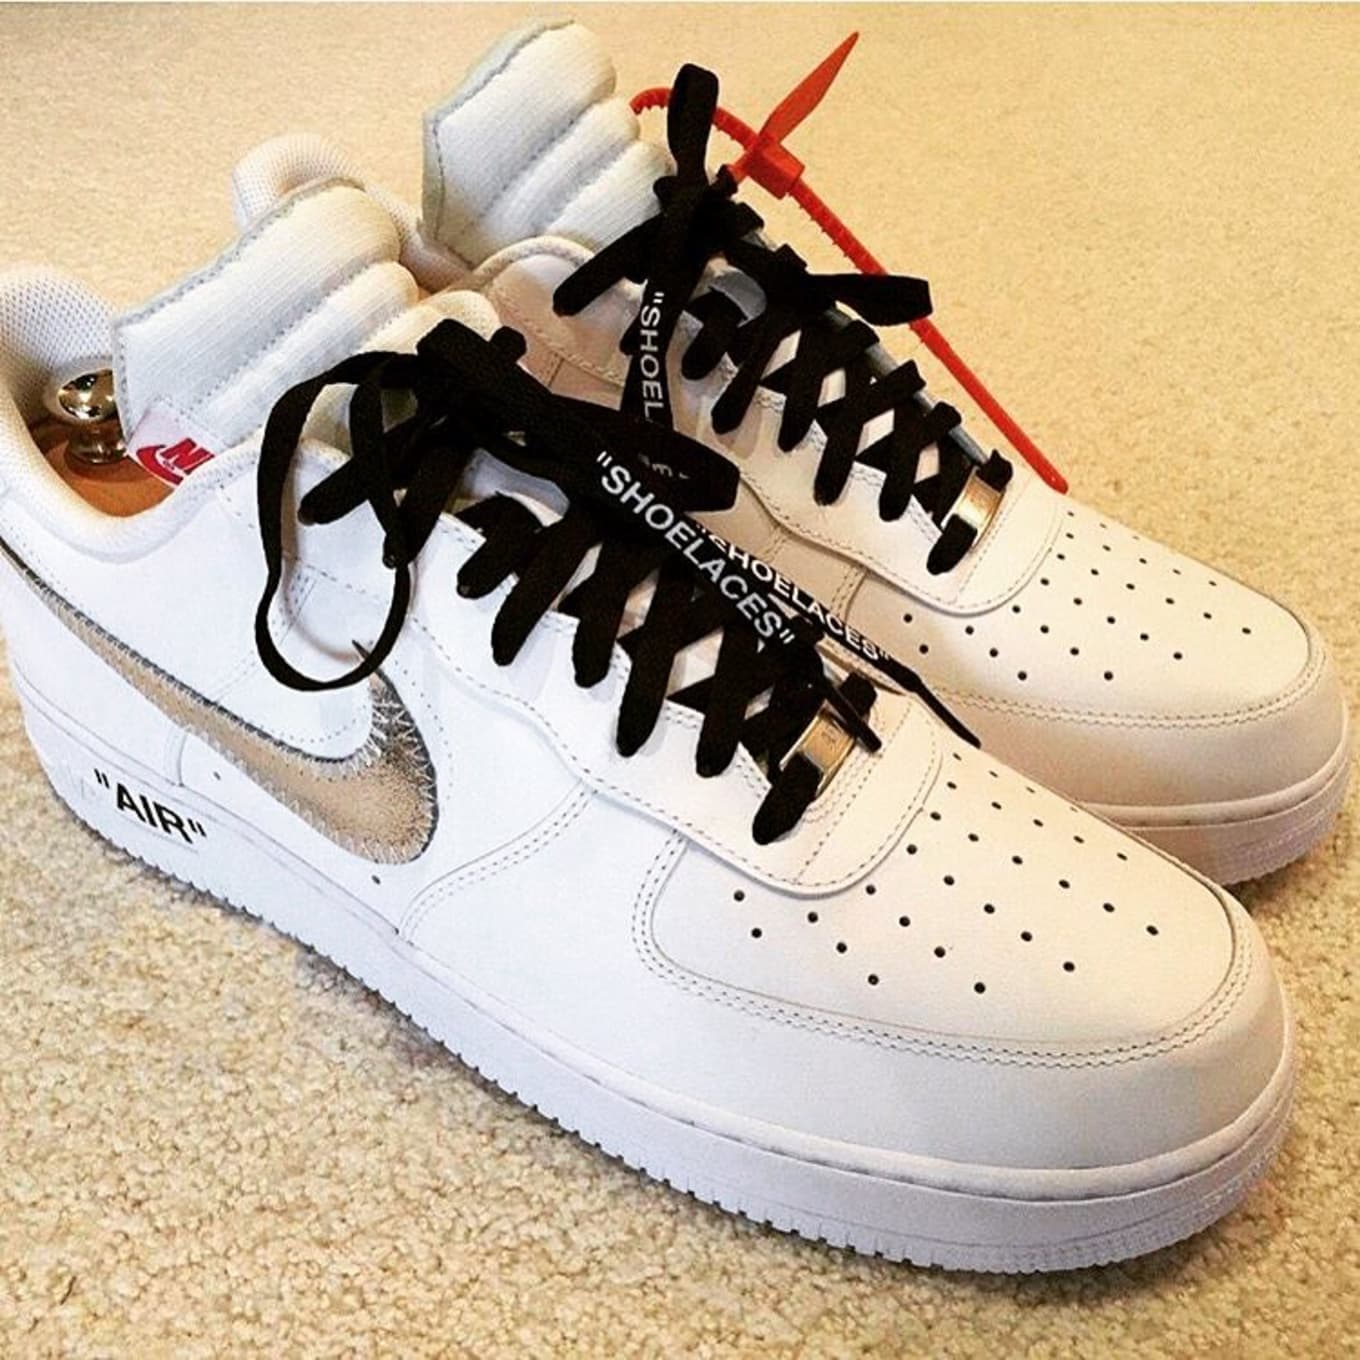 Off-White Nike Air Force 1 White Release Date | Sole Collector